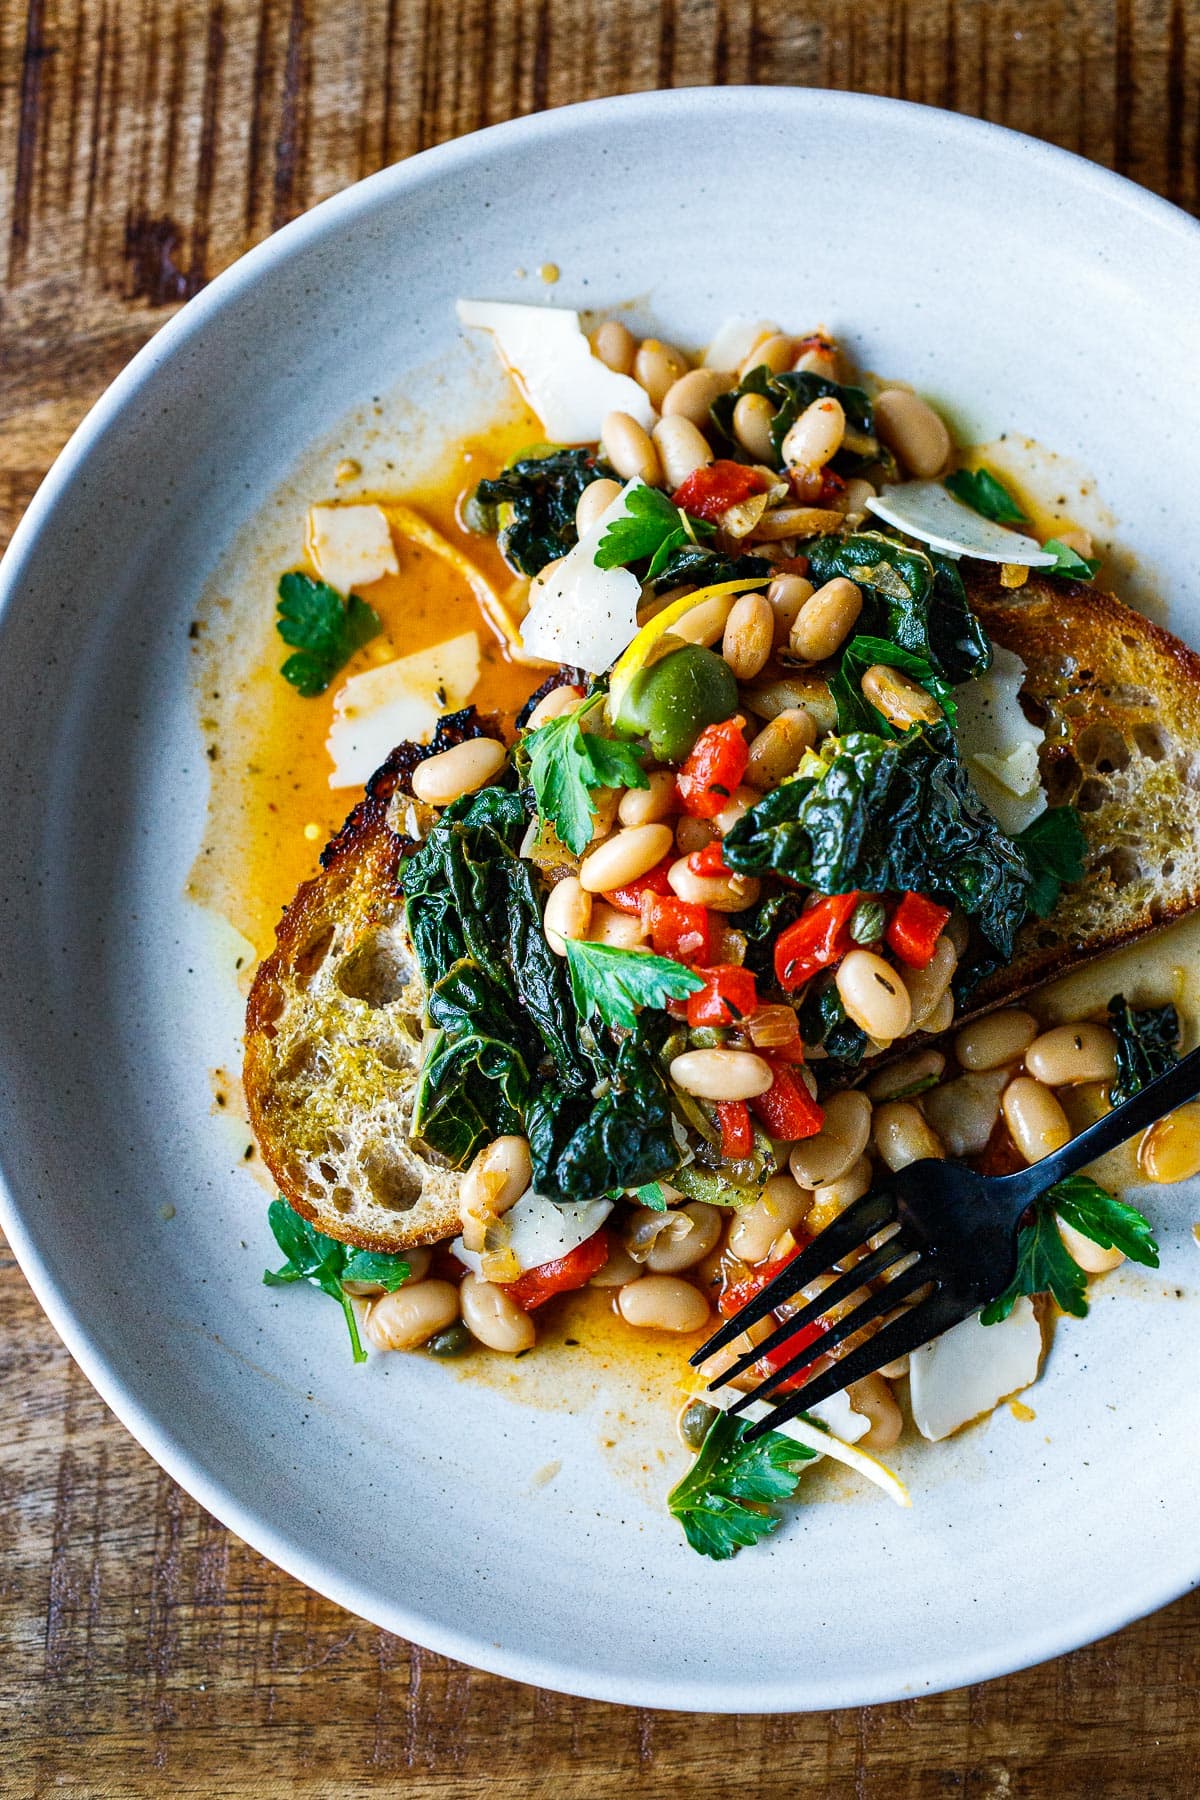 Flavorful Brothy Beans with Lacinato kale, roasted peppers, olives, capers and lemon zest served over crispy garlic-infused sourdough toast.